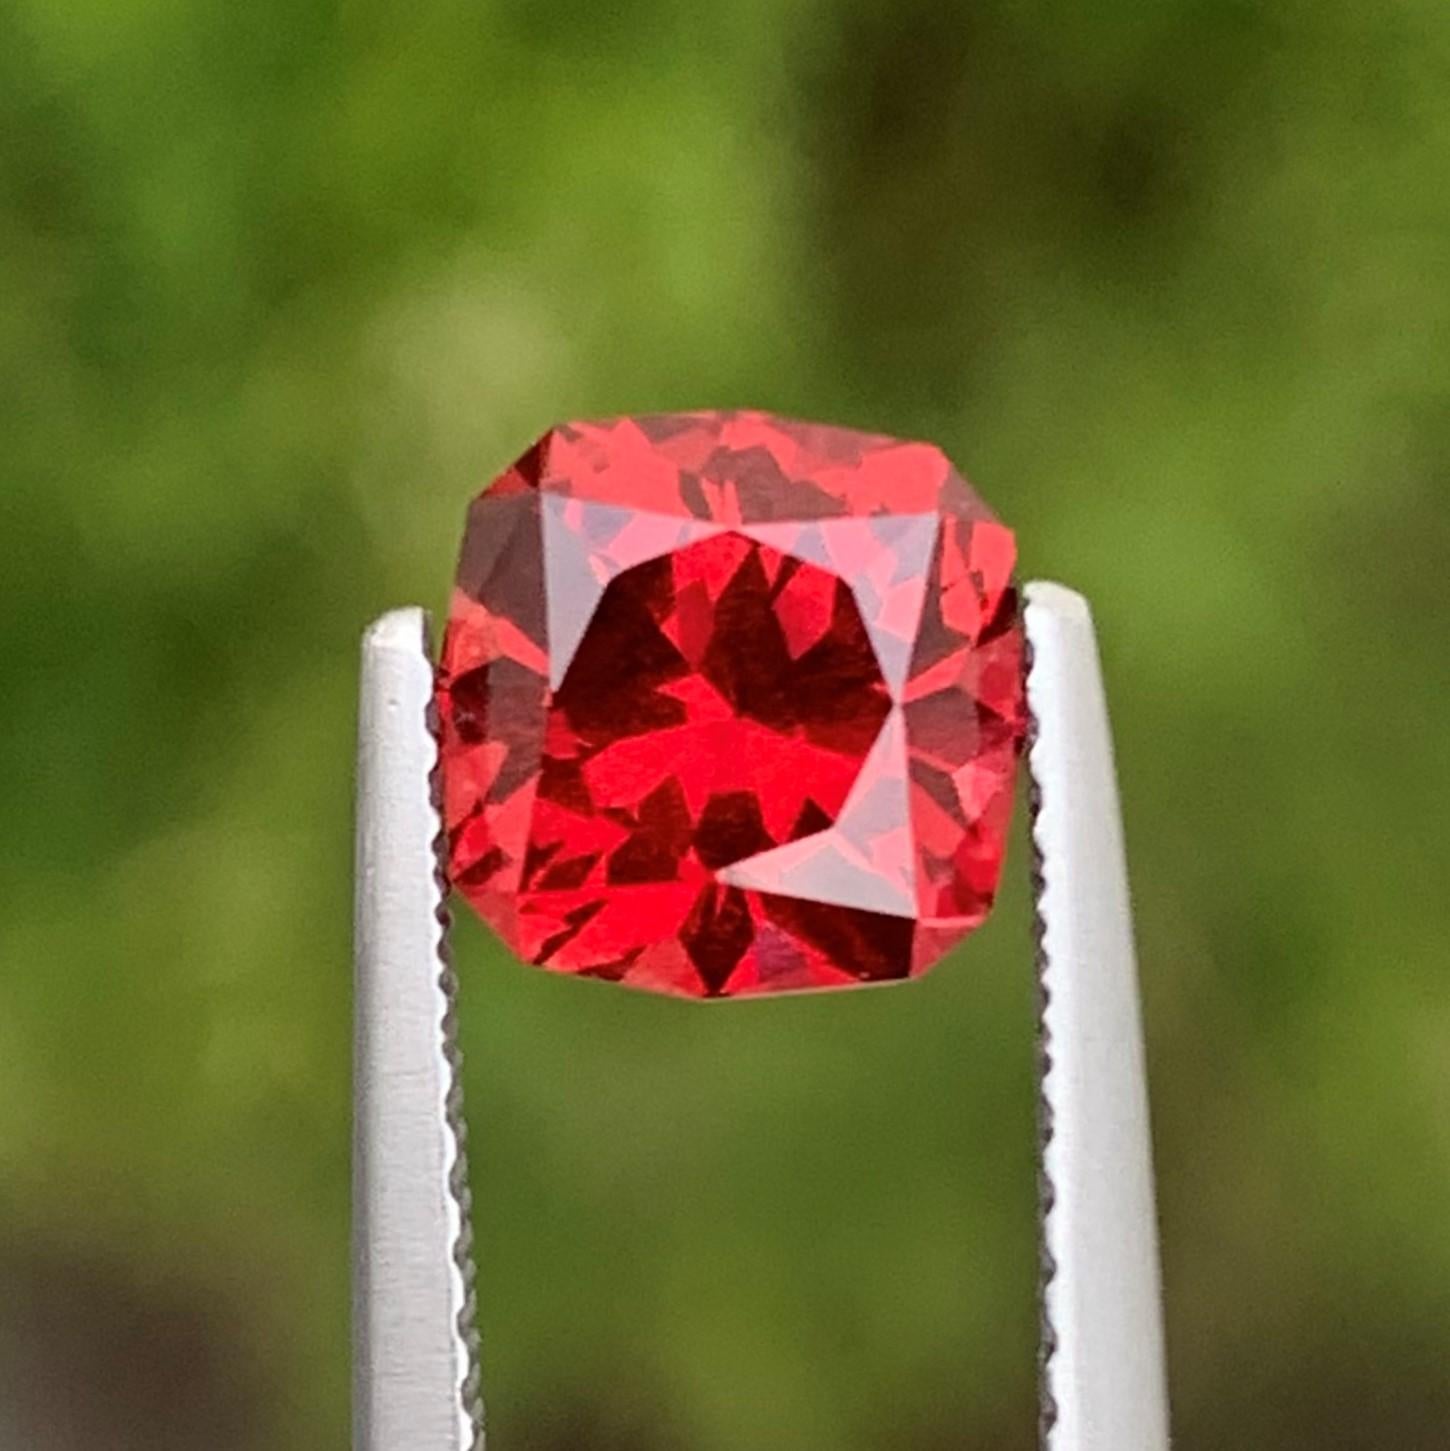 Antique Cushion Cut 2.10 Carat Clean Faceted Red Tanzanian Garnet Fancy Cut for Jewelry Making For Sale